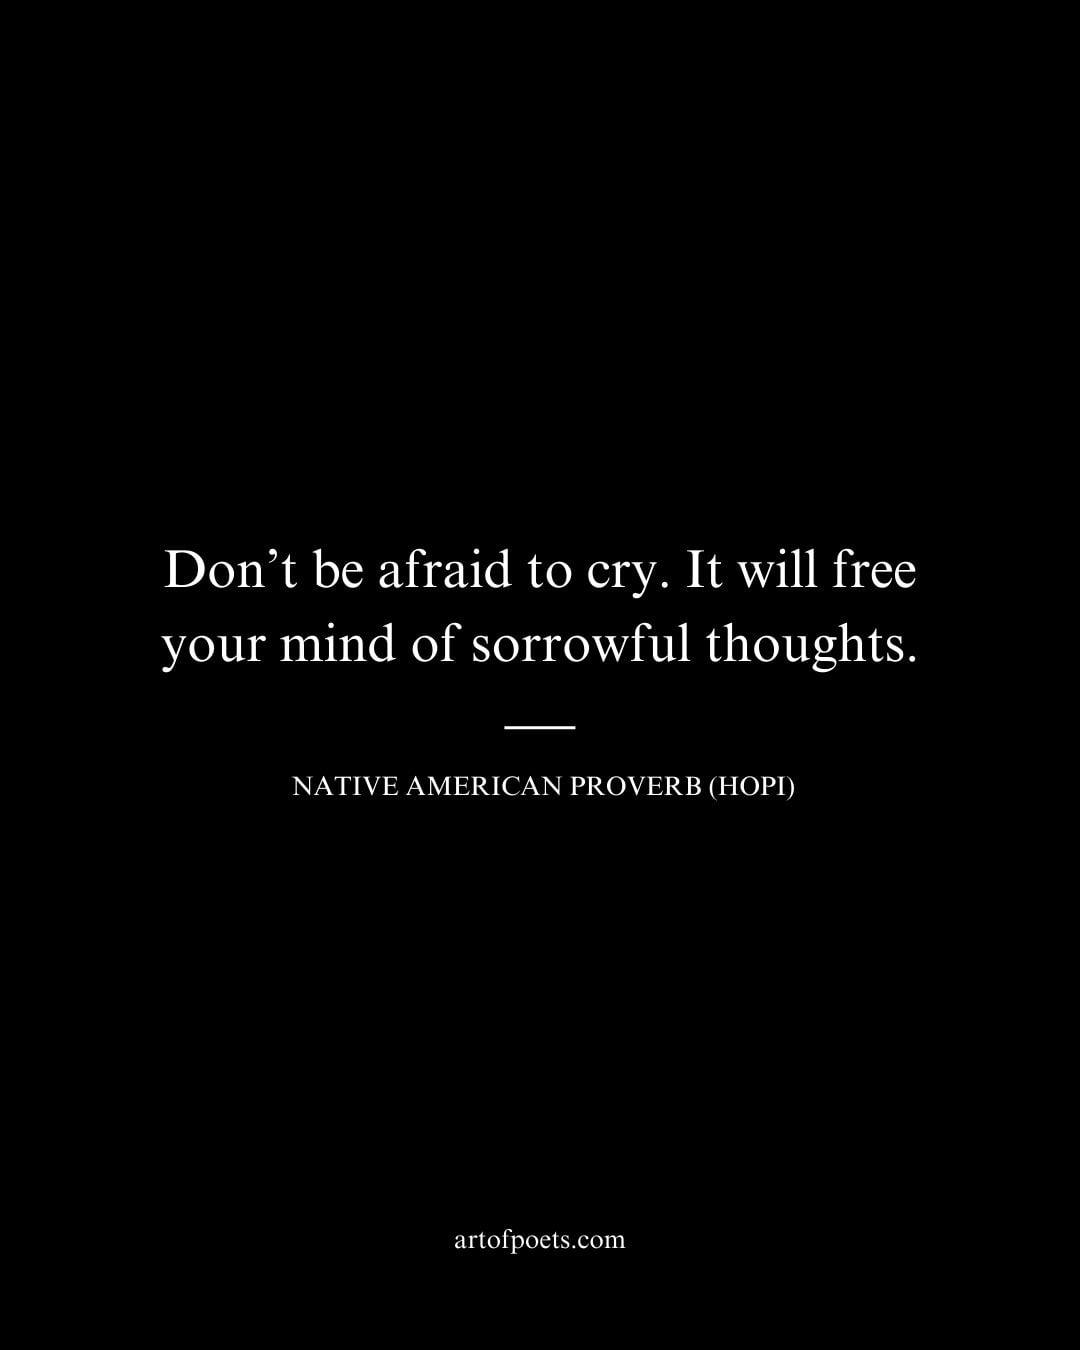 Dont be afraid to cry. It will free your mind of sorrowful thoughts 1